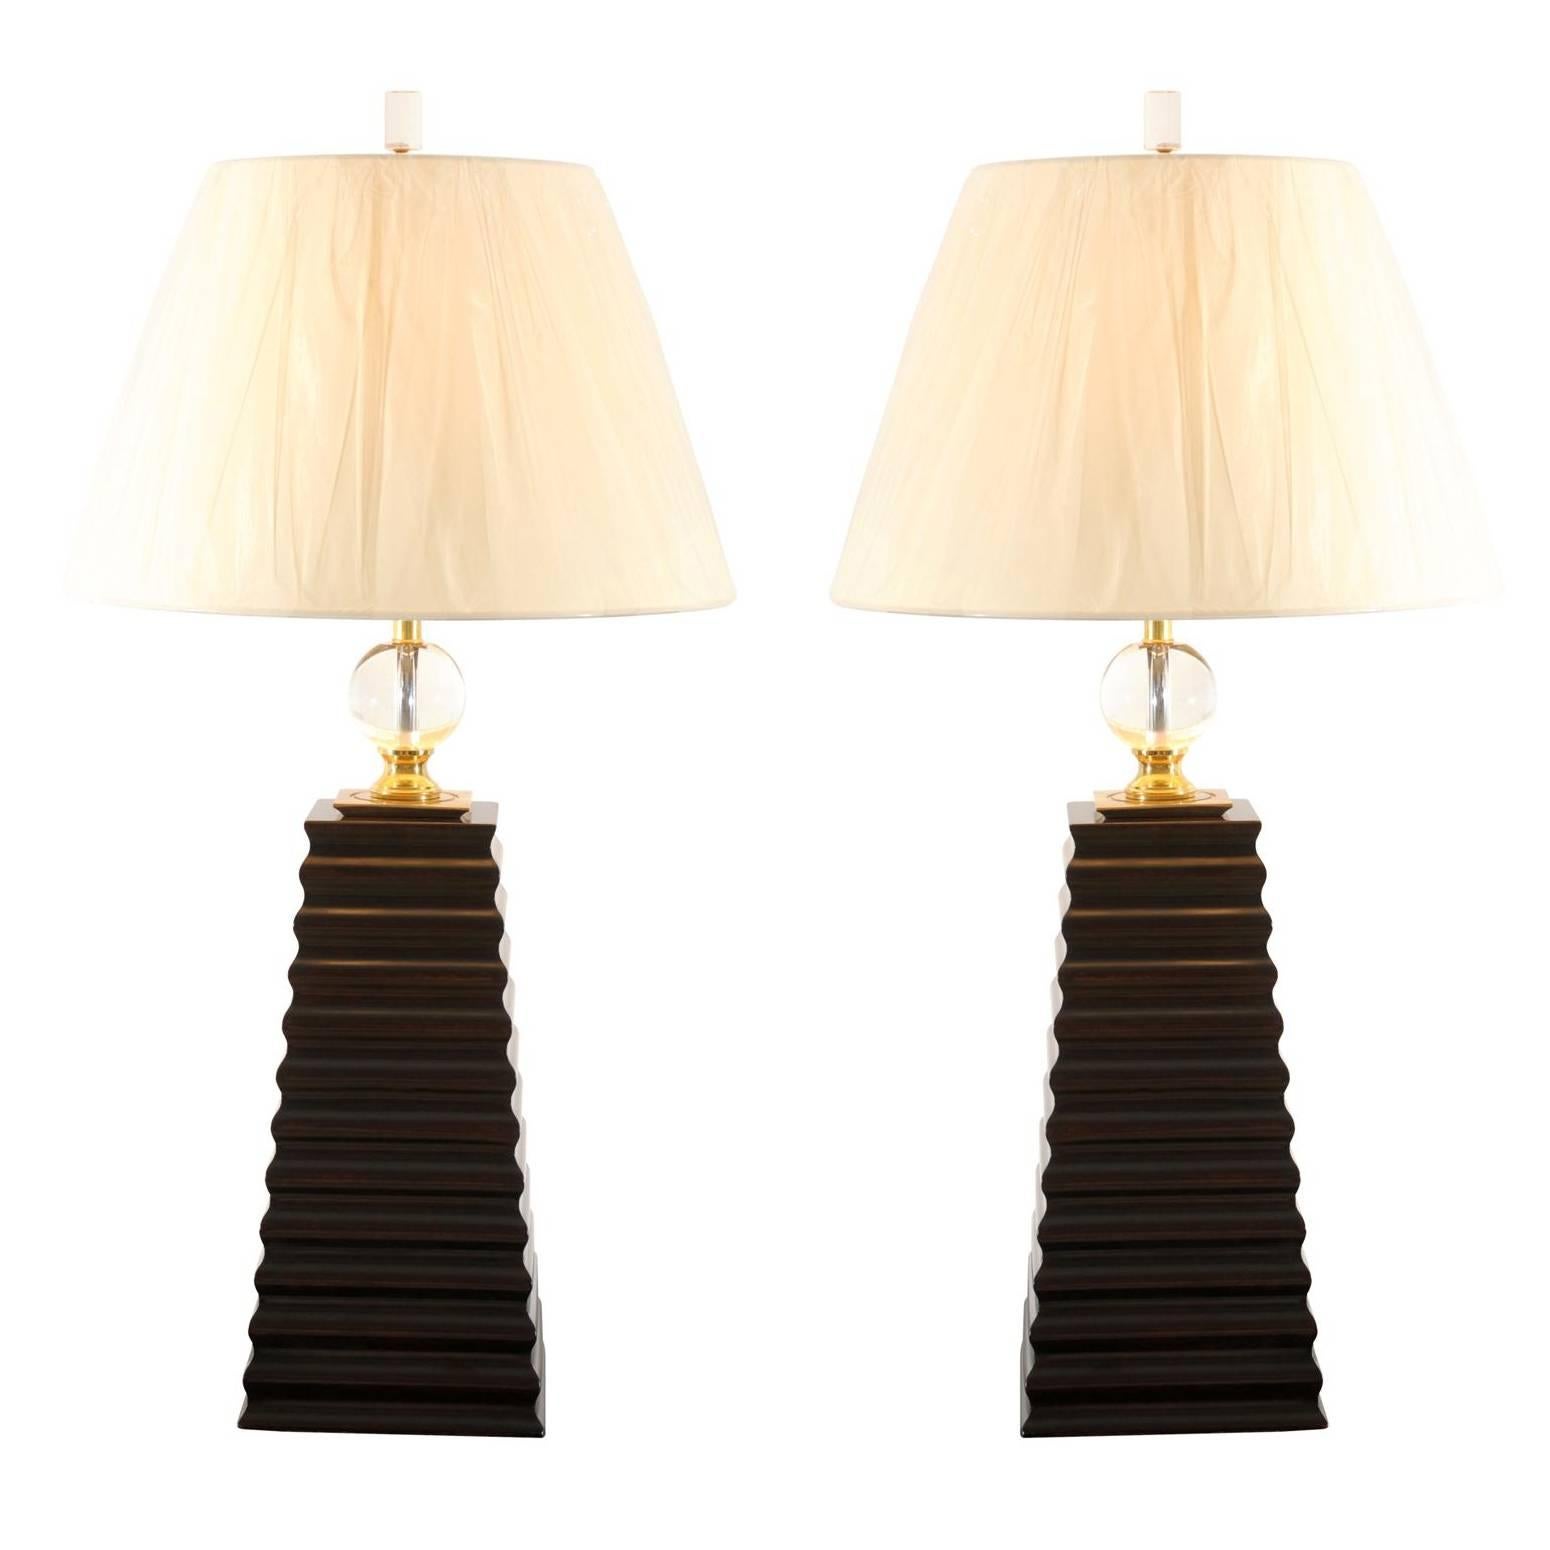 Pair of Fluted Obelisk Lamps with Brass and Crystal Accents